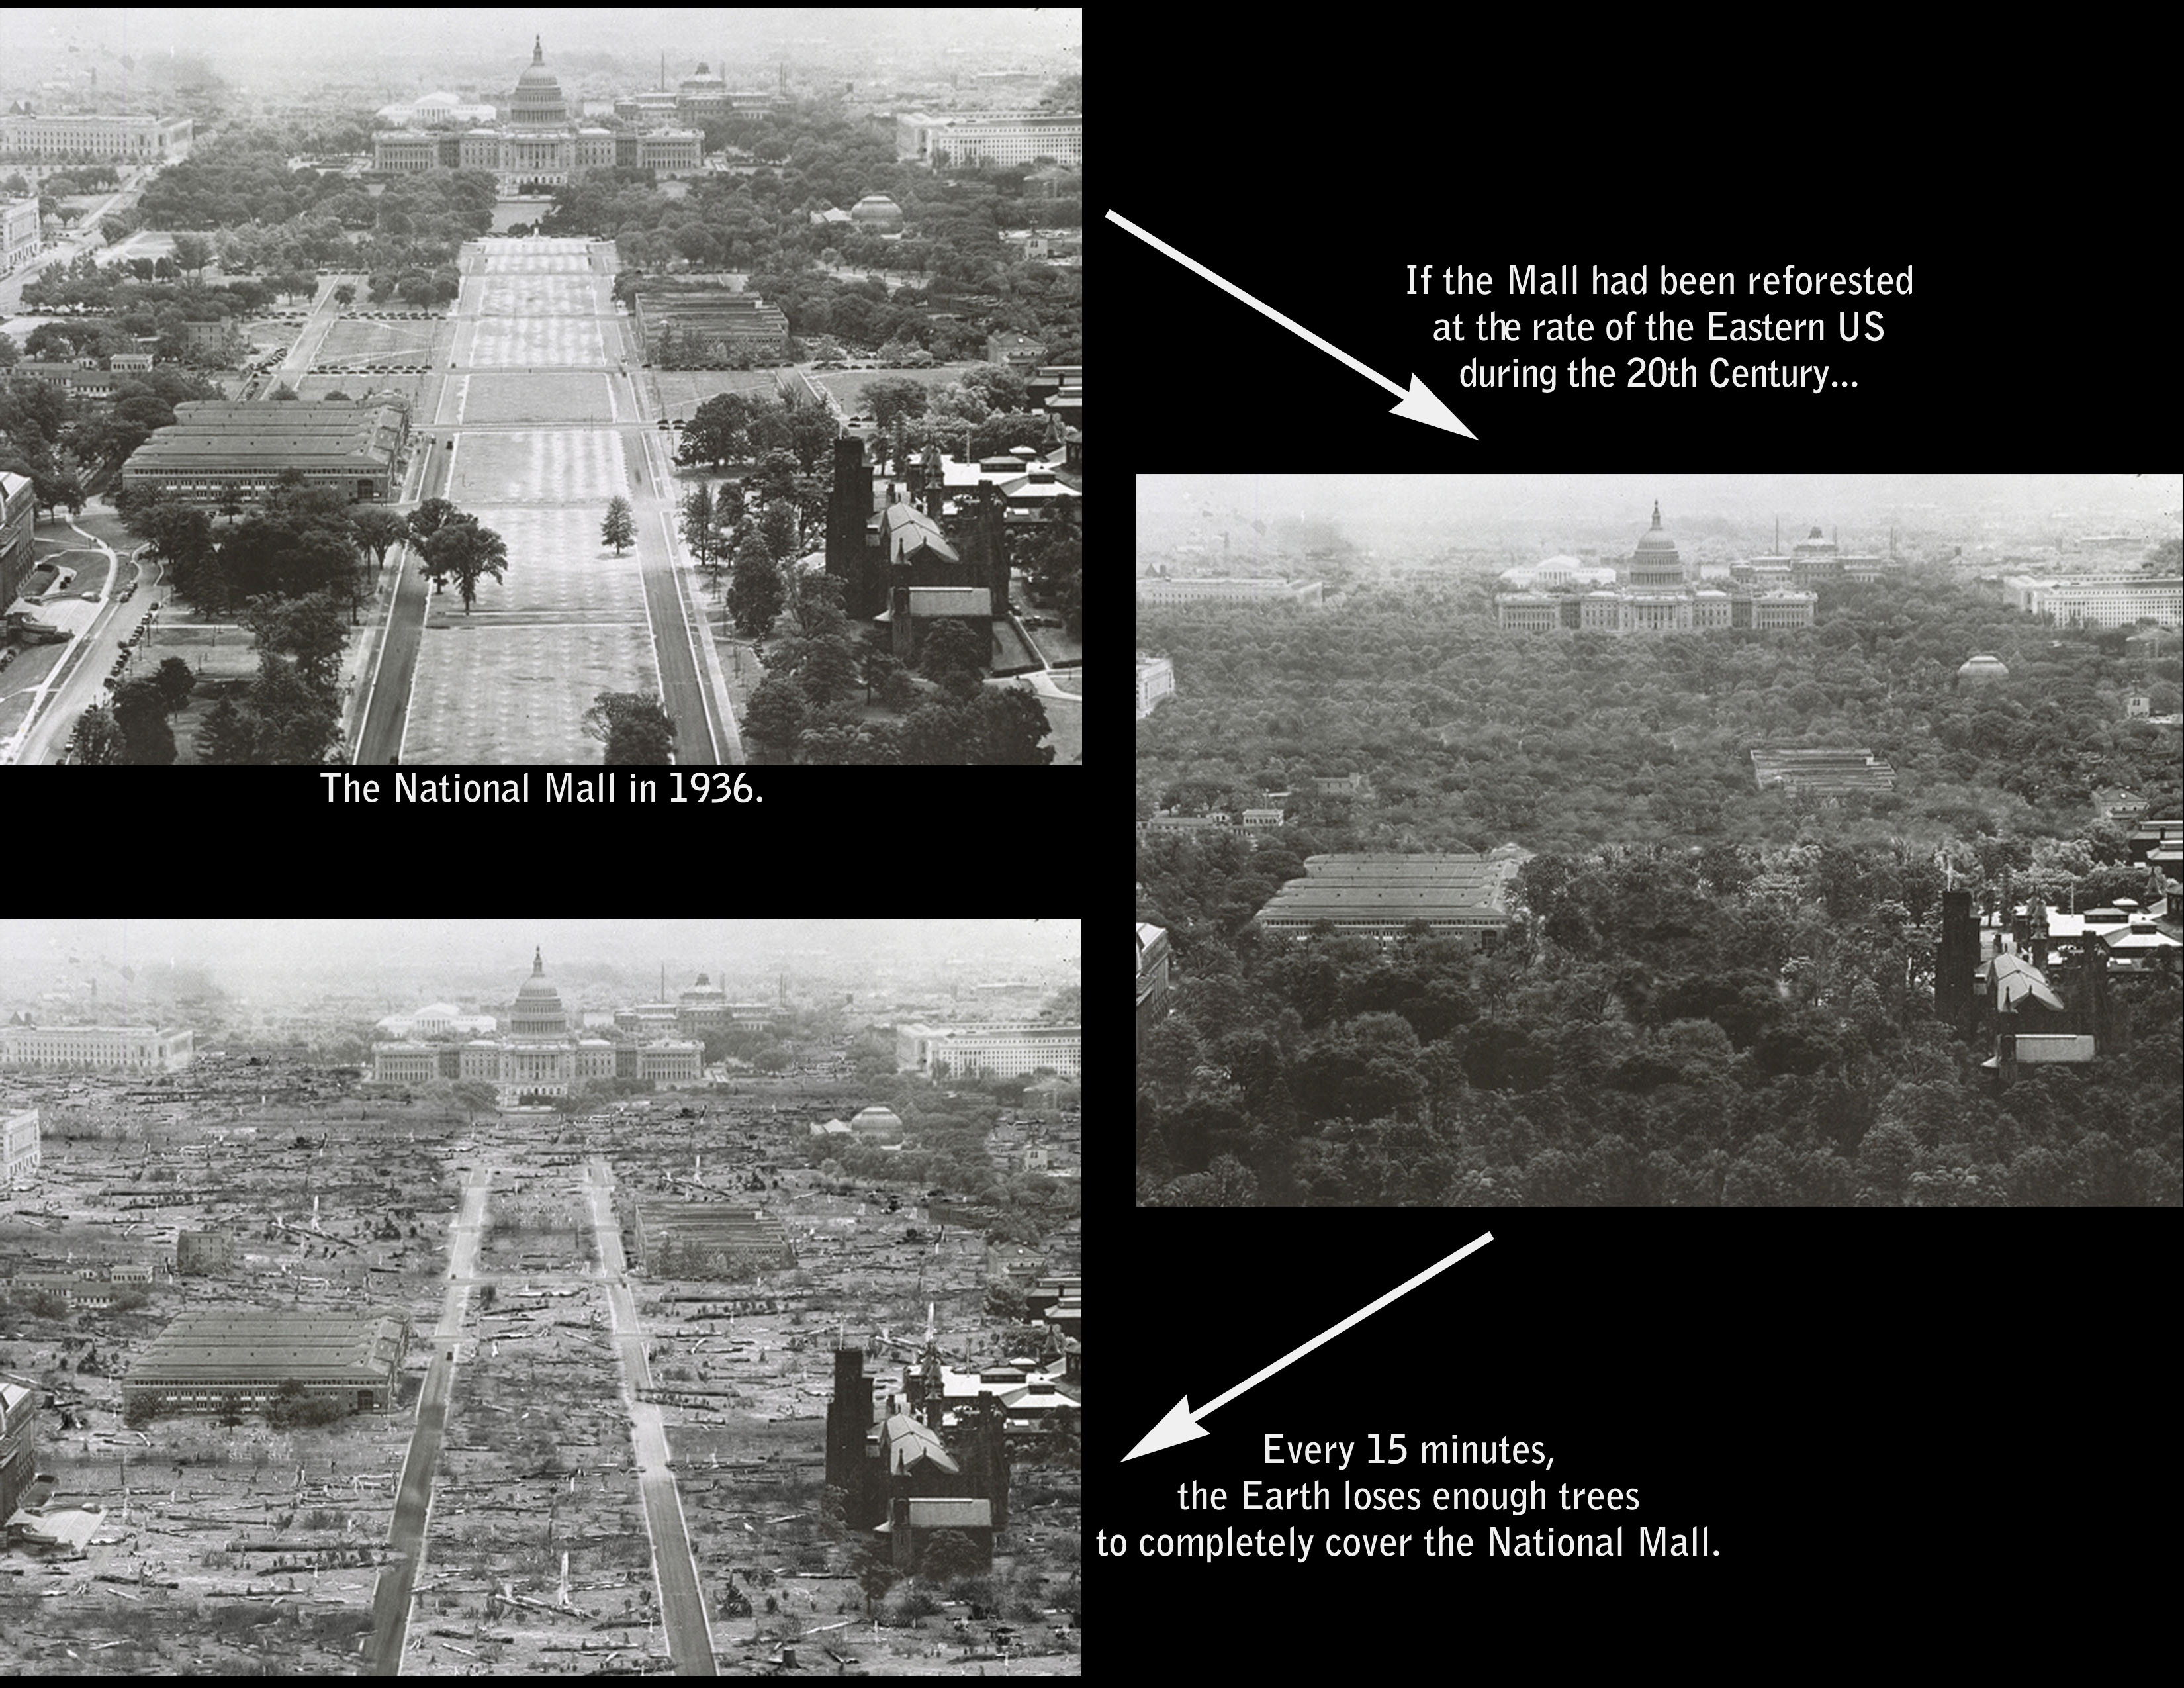 Graphic comparing three images of the U.S. National Mall:  First, as it looked in 1936.  Second, the Mall if it had been reforested at the same rate as the Eastern U.S. during the 2oth century. Third, the amount of trees lost globally around the world every 15 minutes.